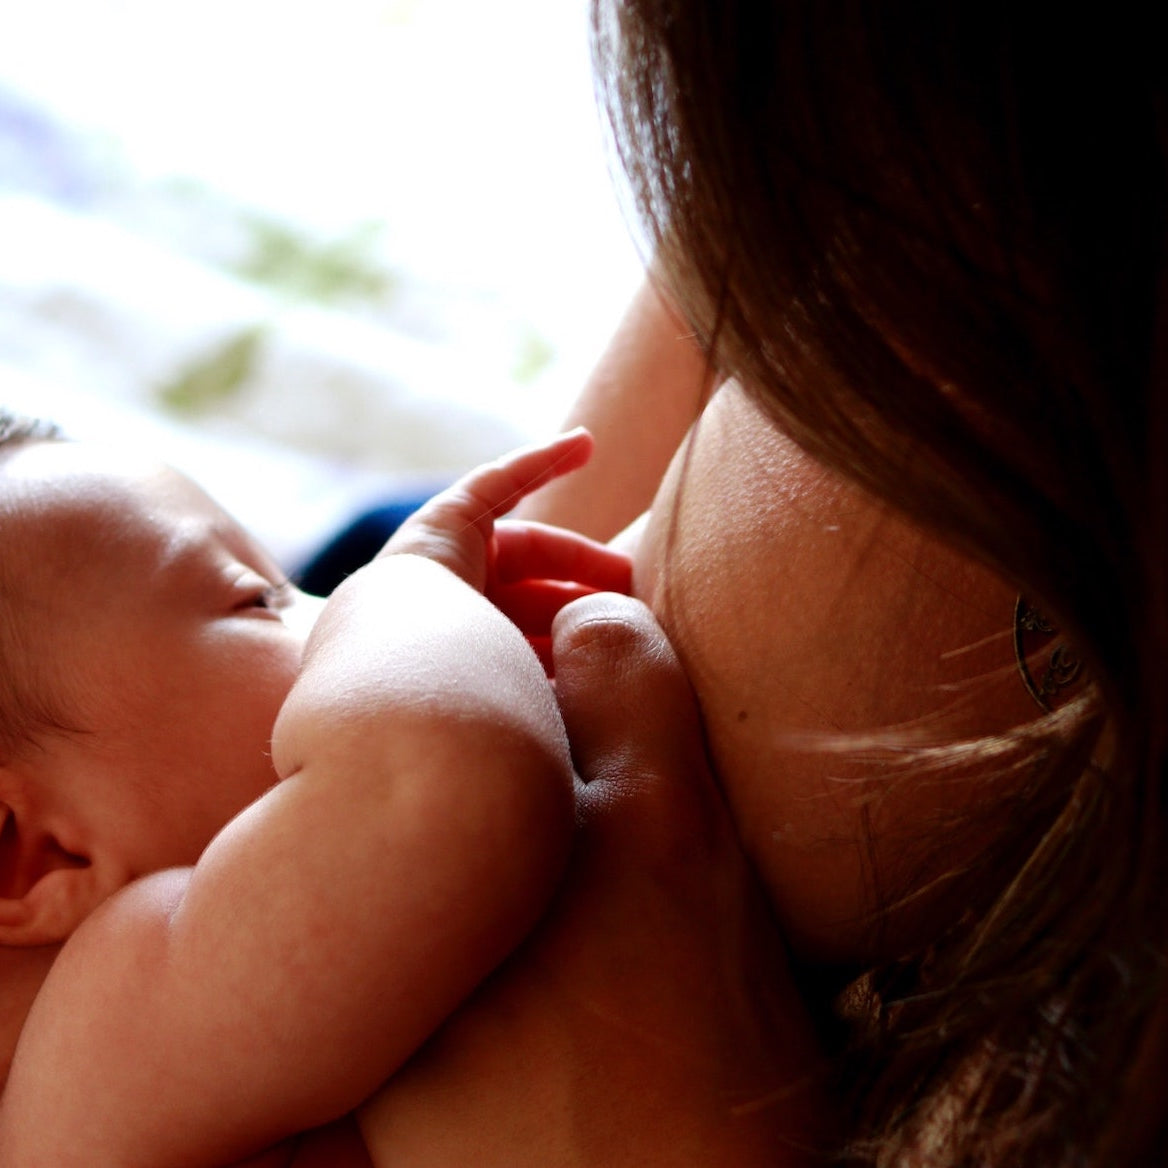 Breastfeeding Diet: What to Eat When You’re Breastfeeding